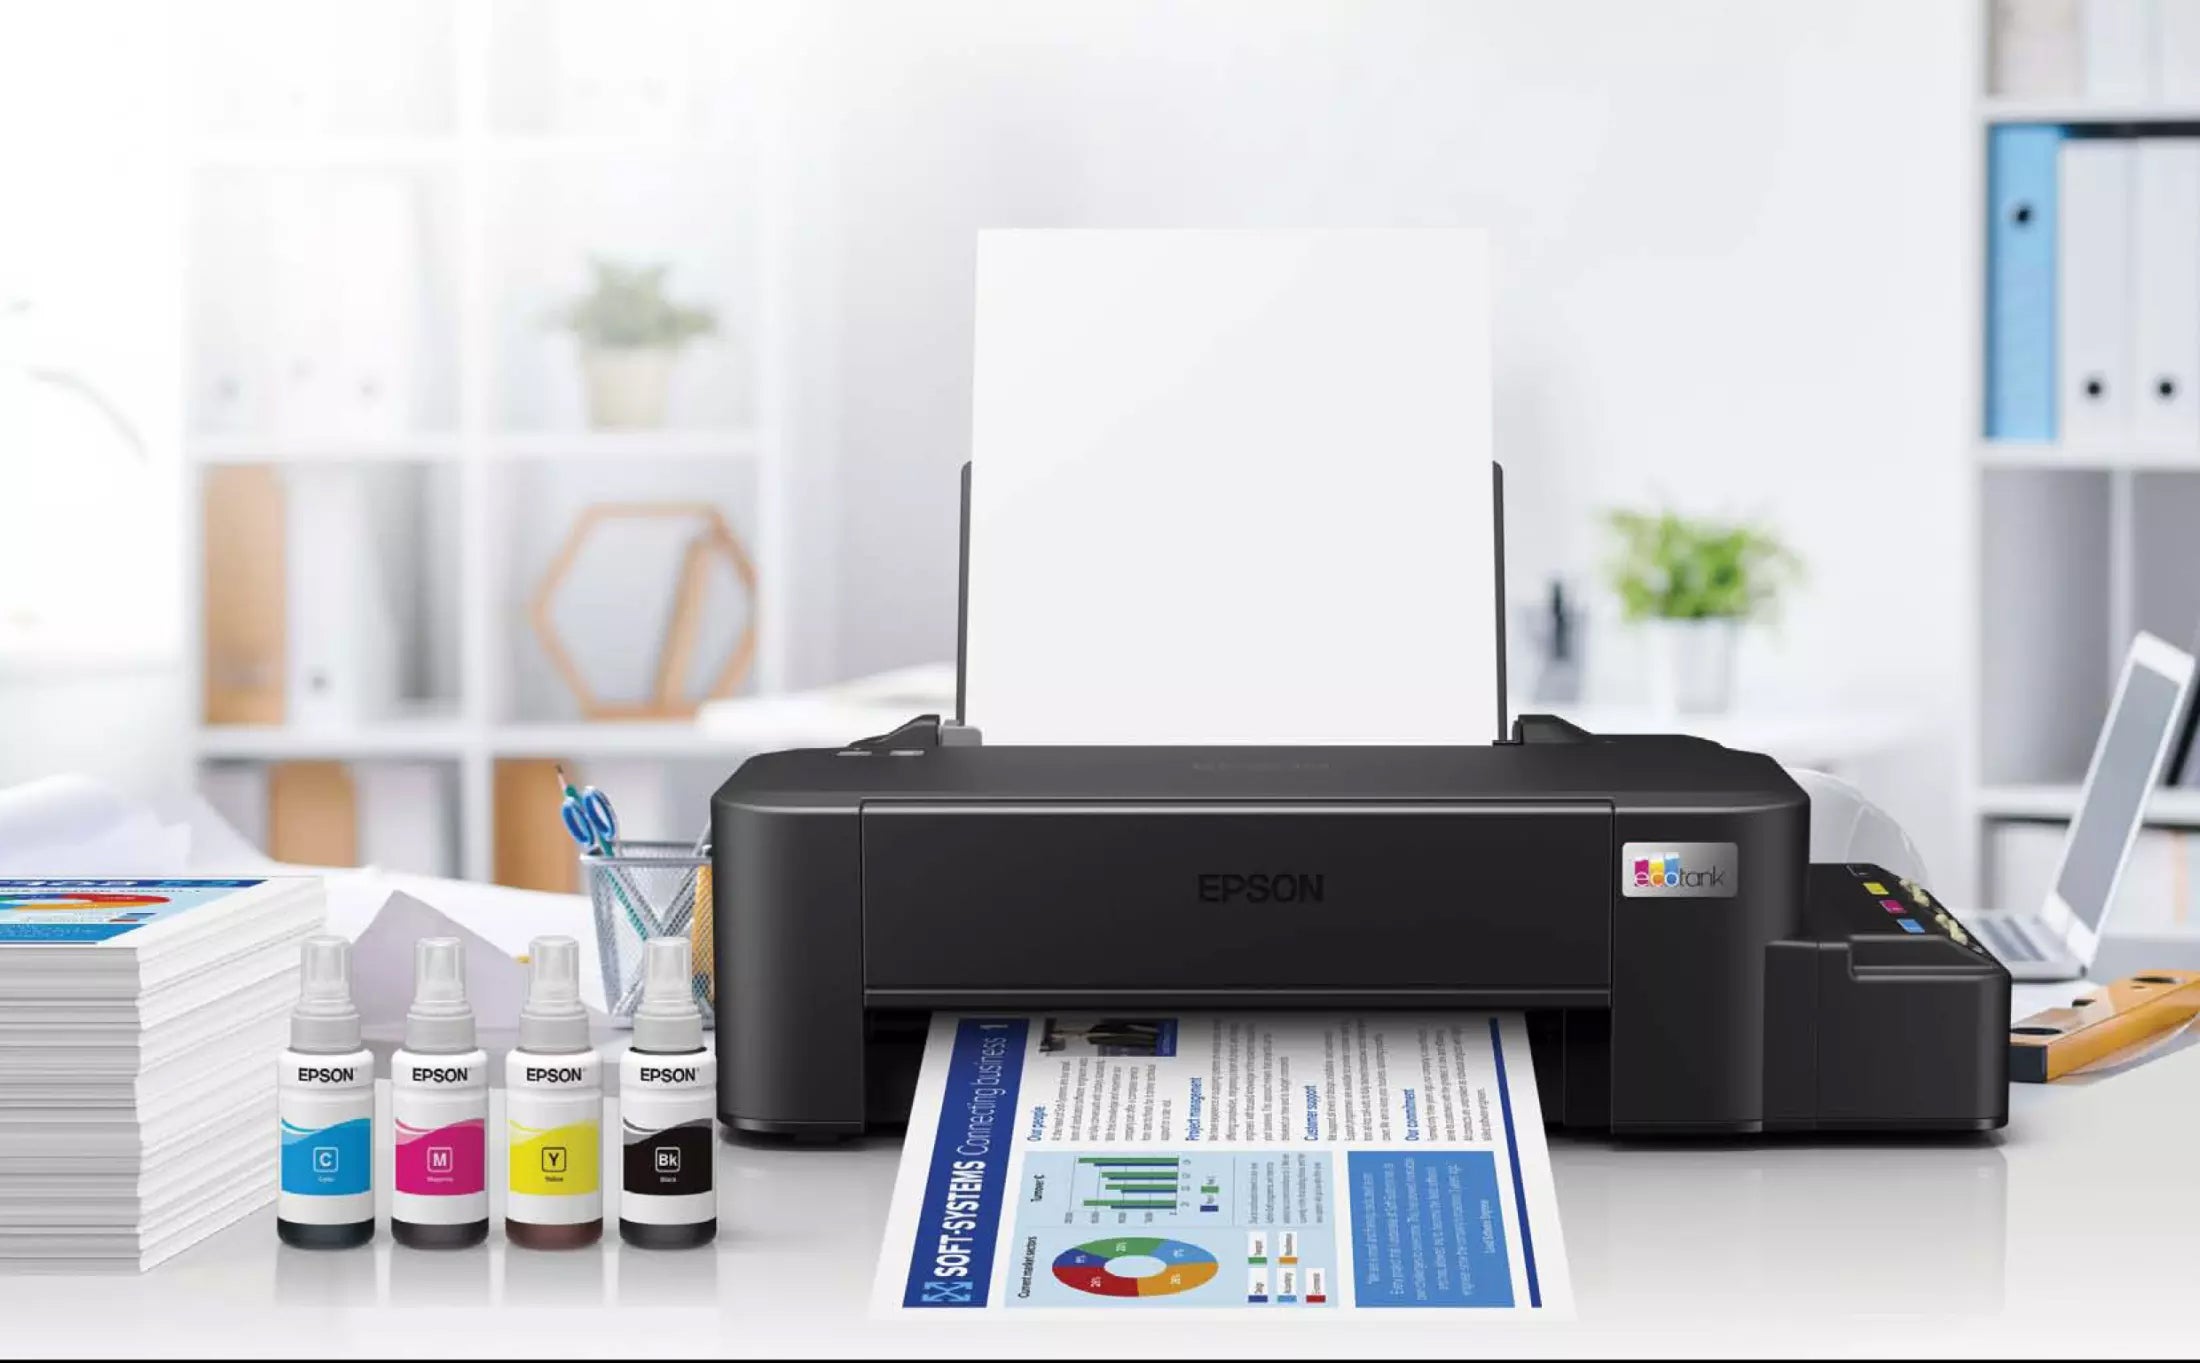 Epson L121 Ink Tank Printer With Free Set Of Inks Brandnew Latest Version Of L120 With Free 8111